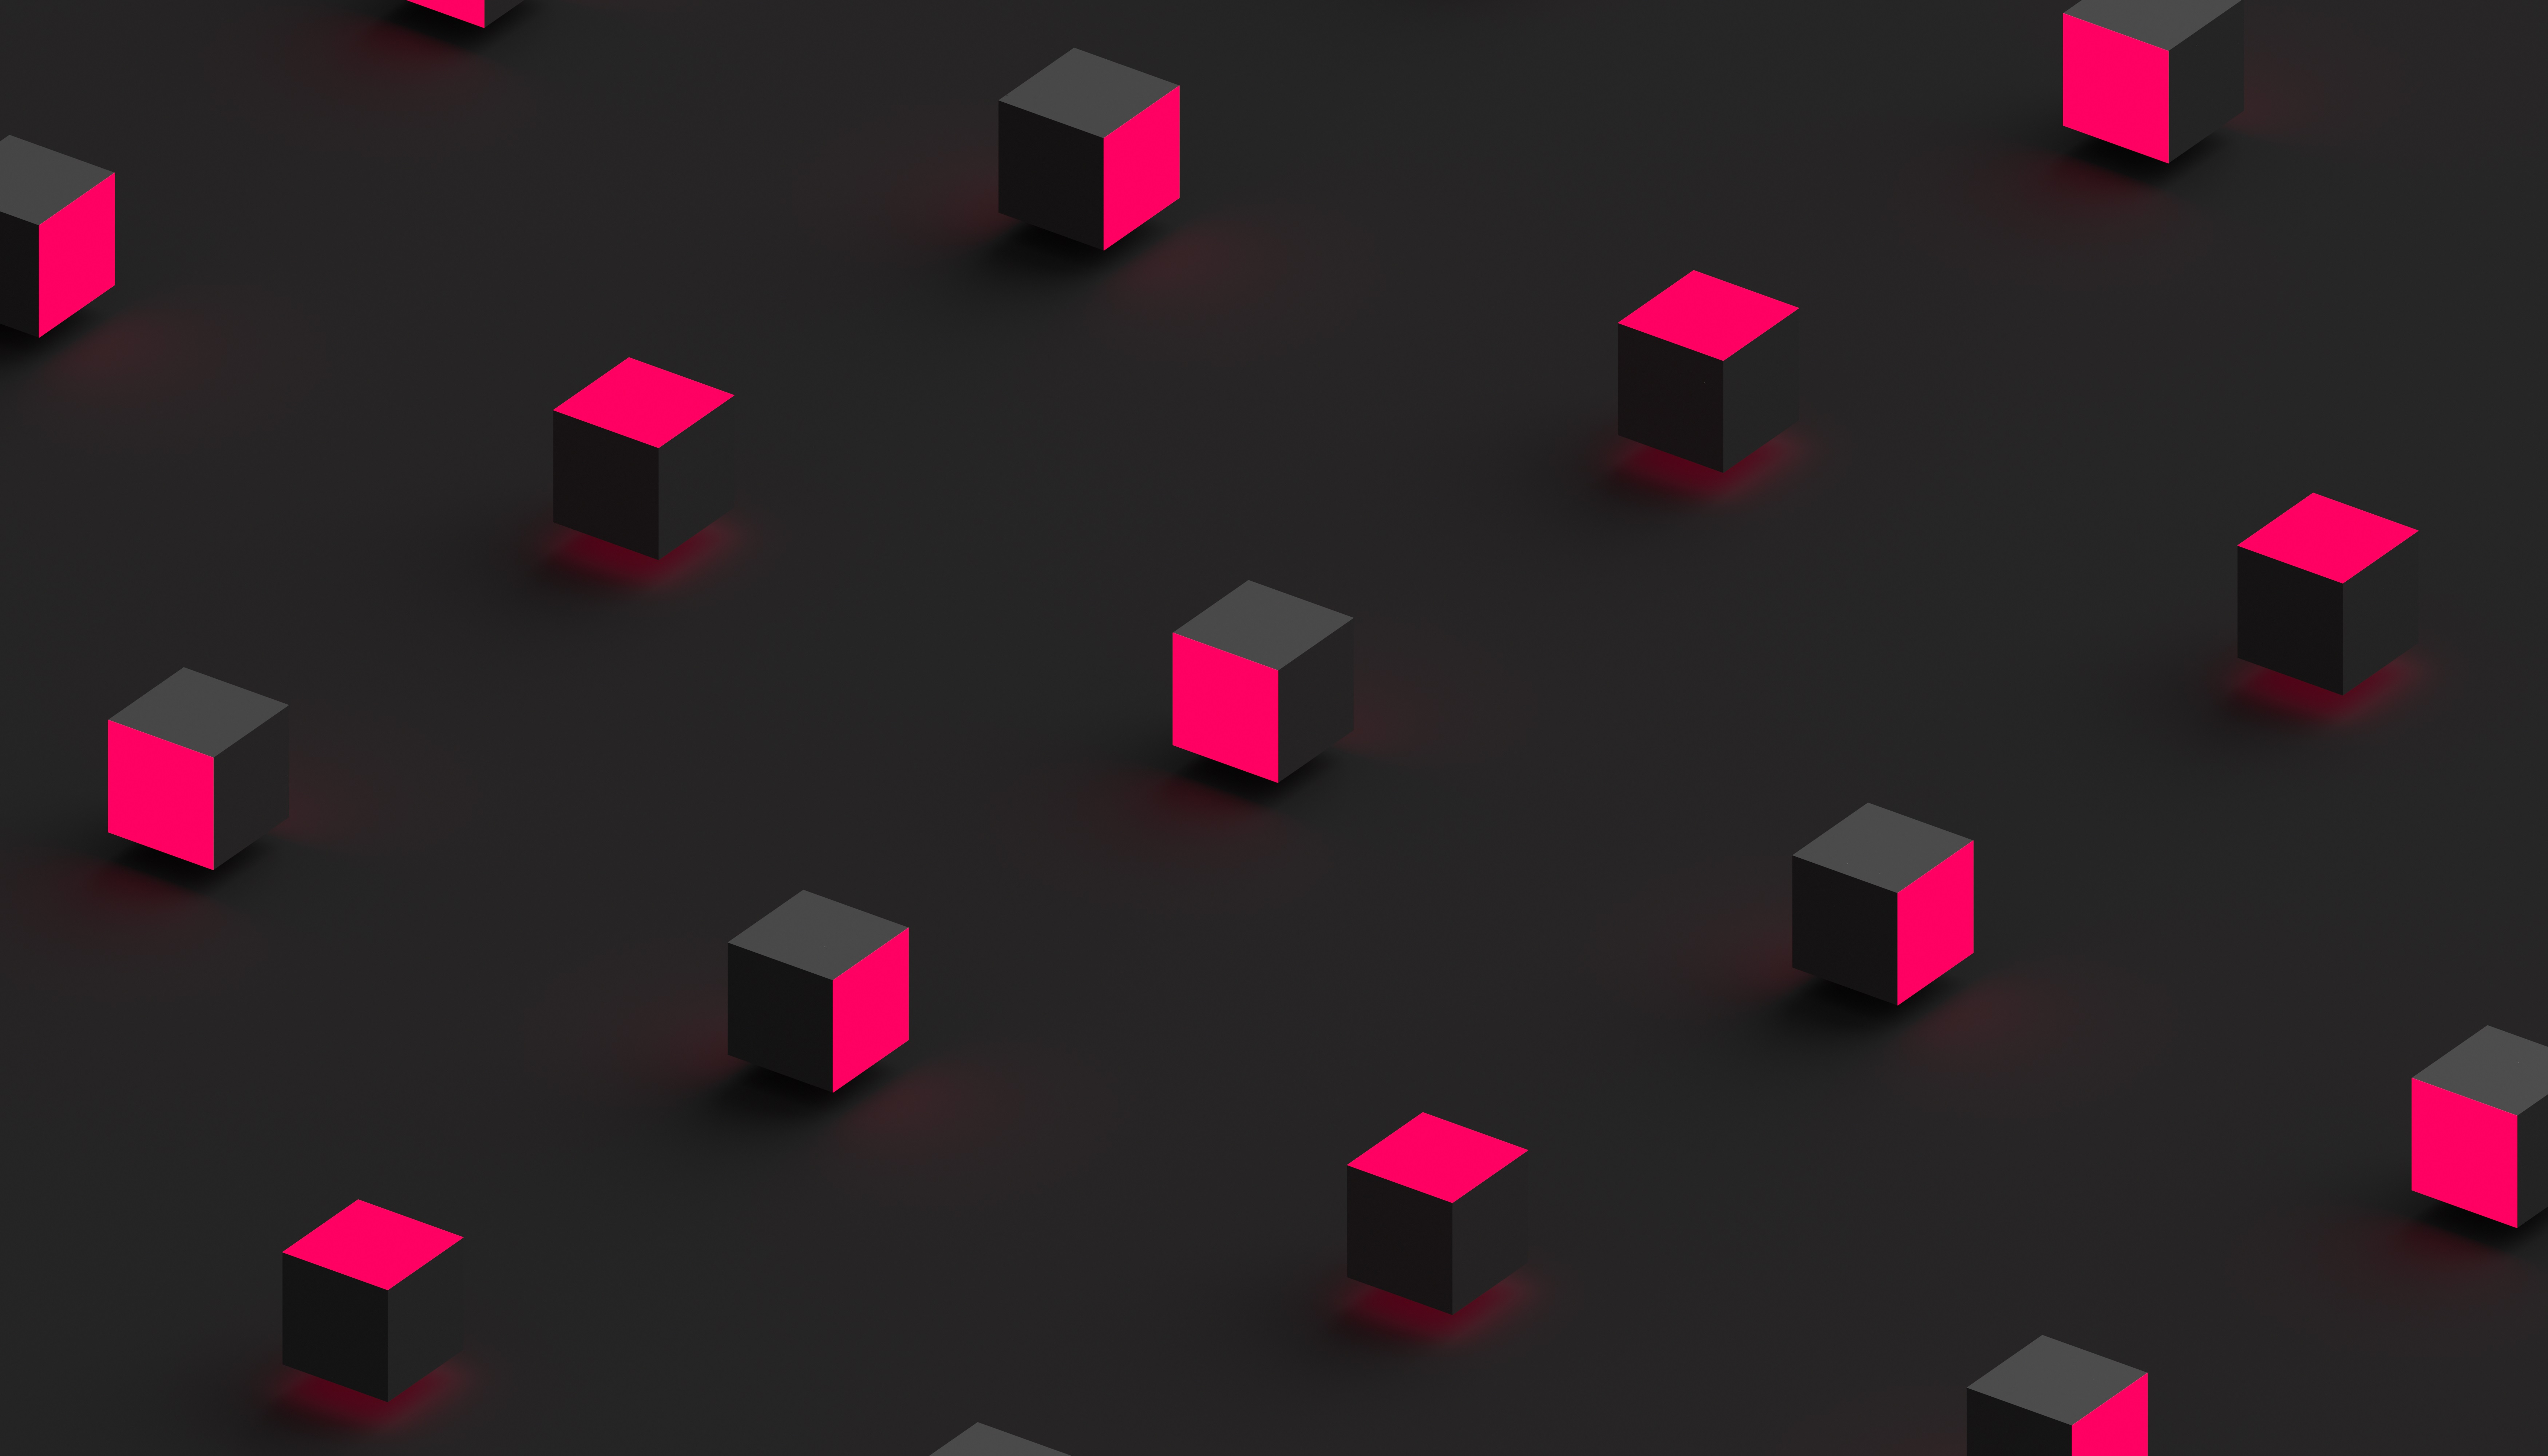 Abstract 3D Abstract Glowing Shapes Lights 3D Minimalism Dark 3D Blocks Pink Vector 7000x4000